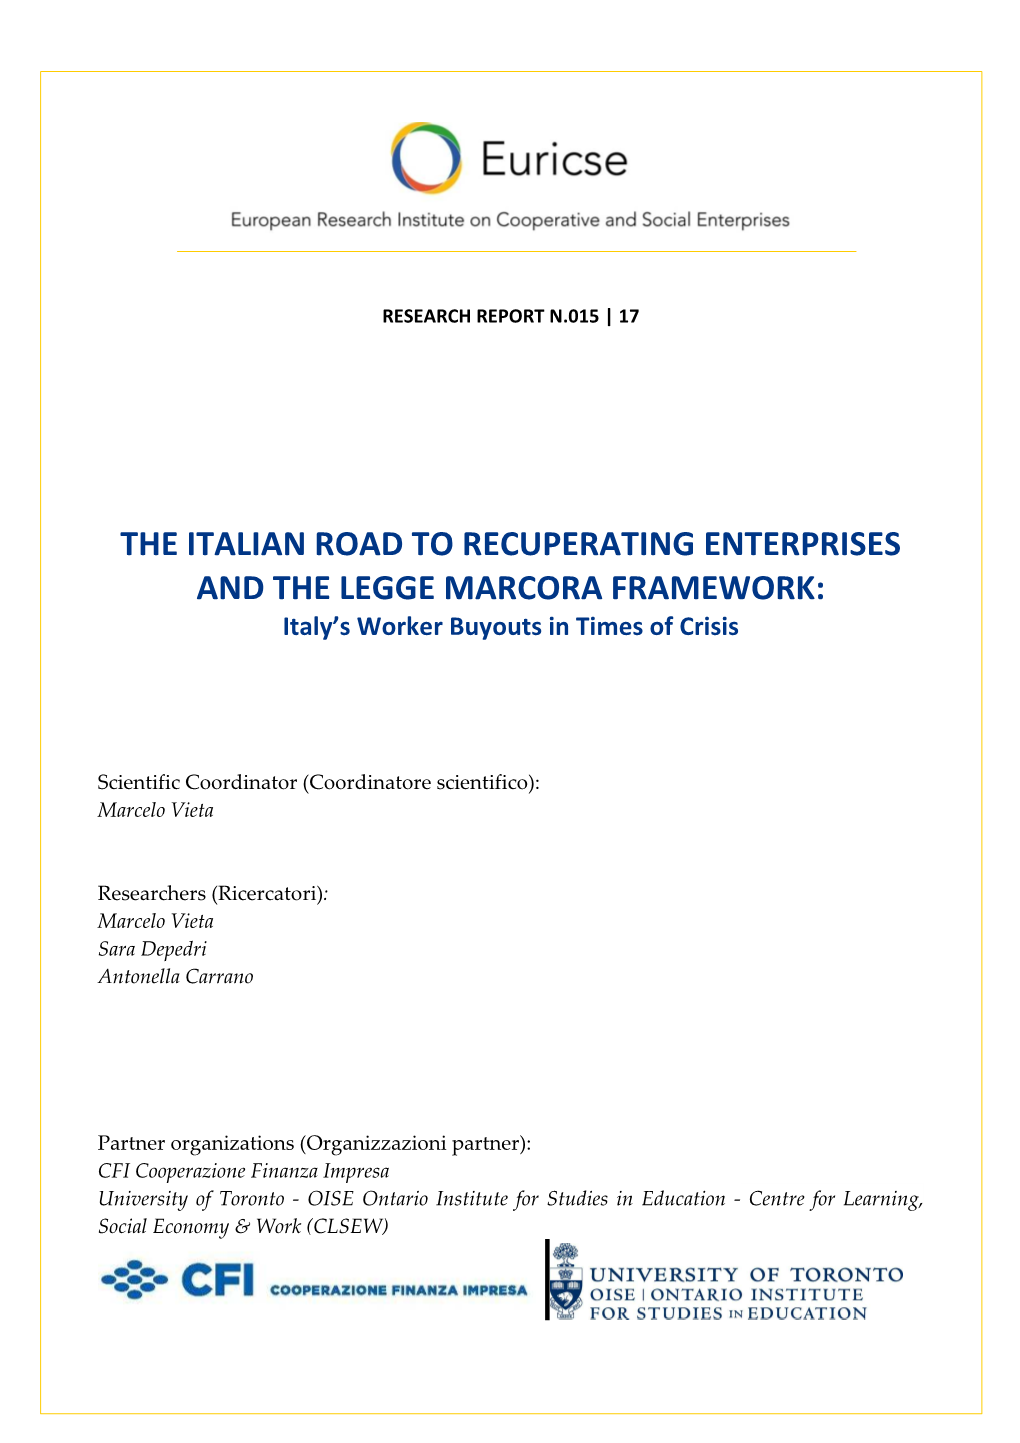 'The Italian Road to Recuperating Enterprises and the Legge Marcora